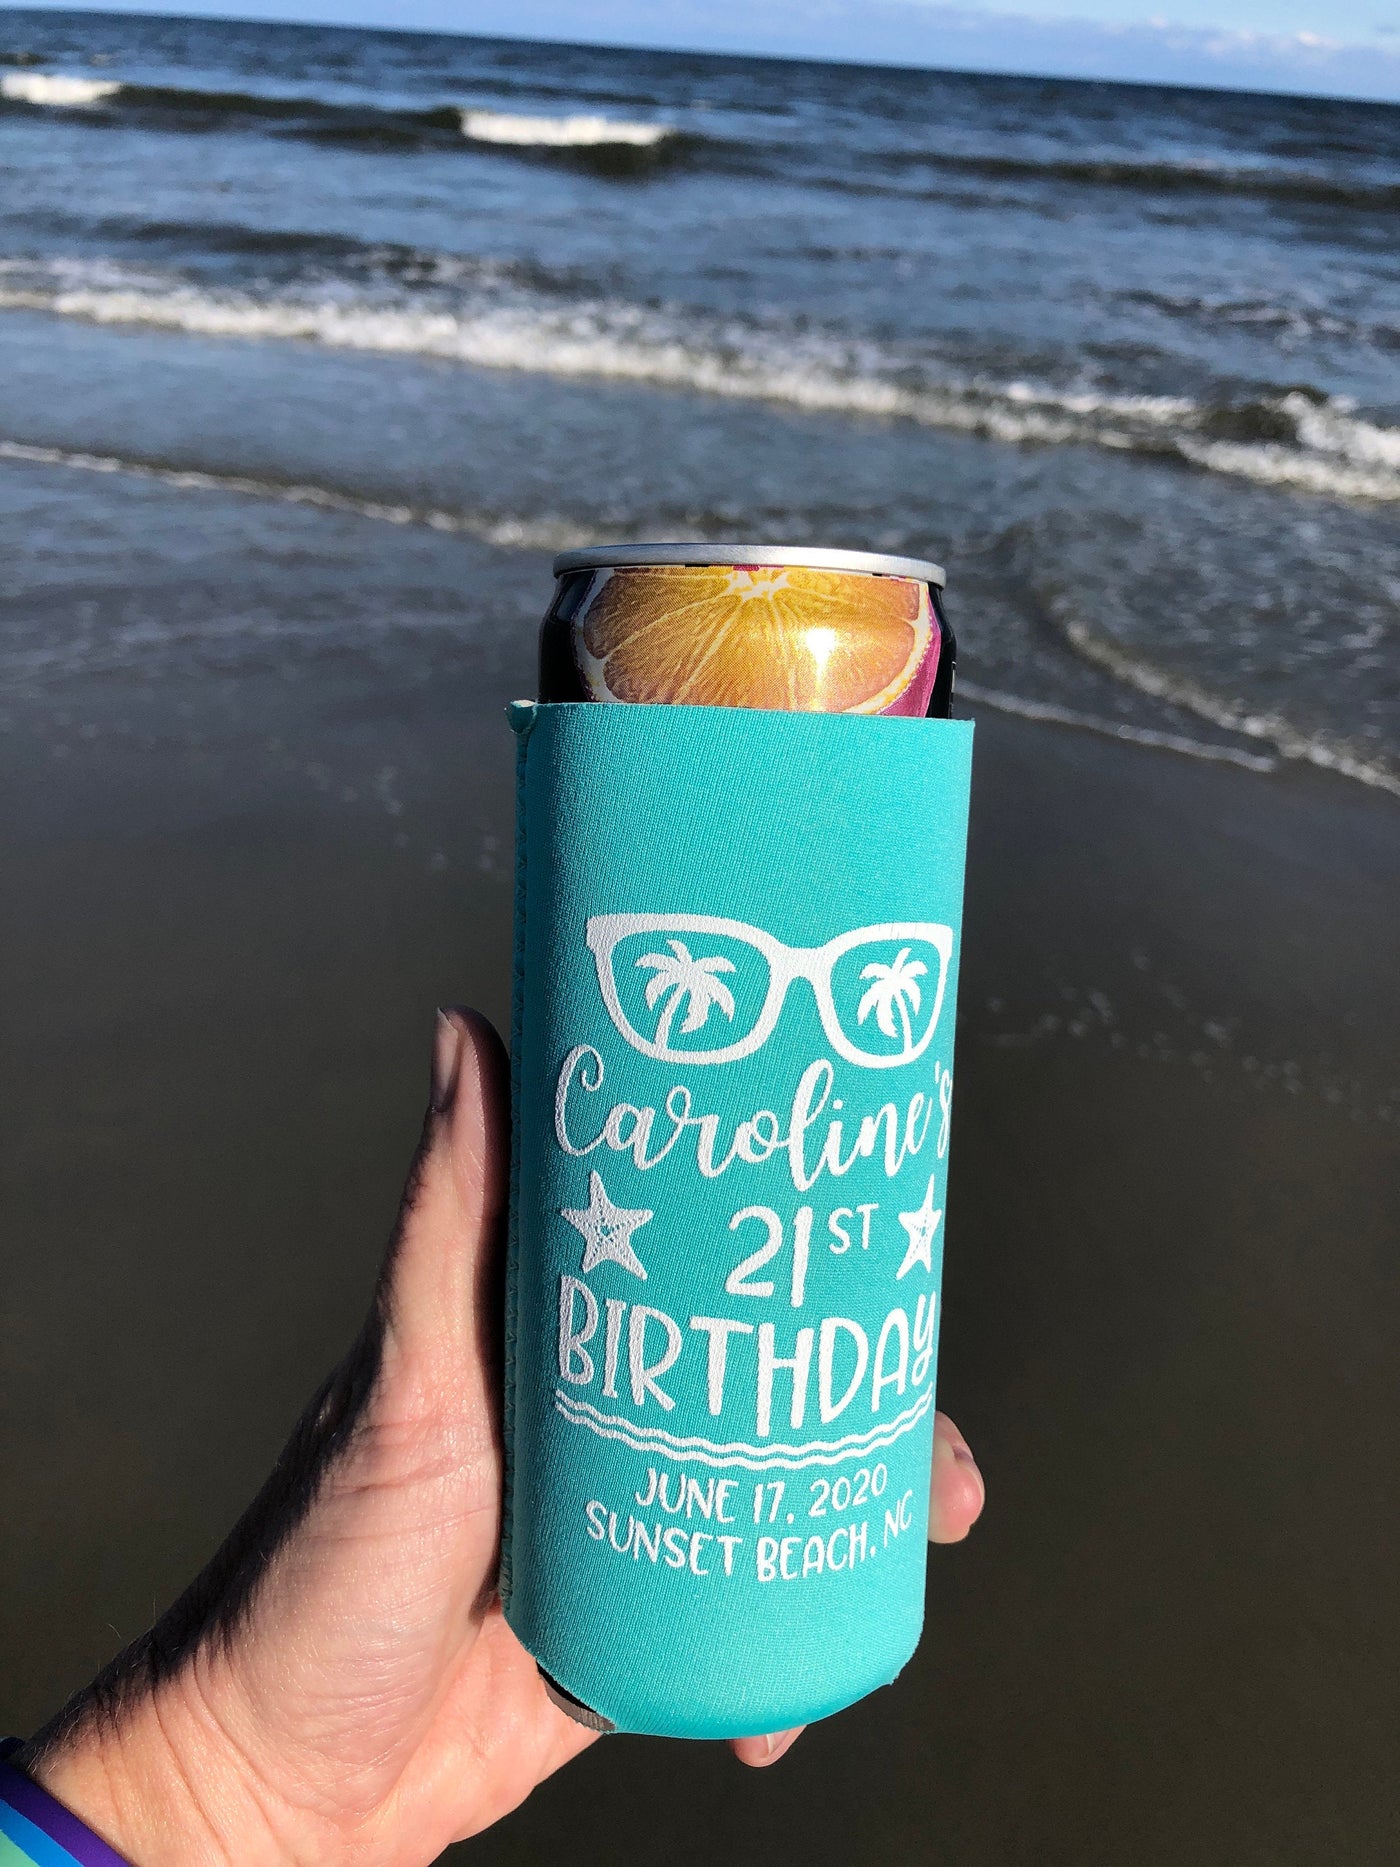 Personalized Party Favor Neoprene Slim Can Coolers